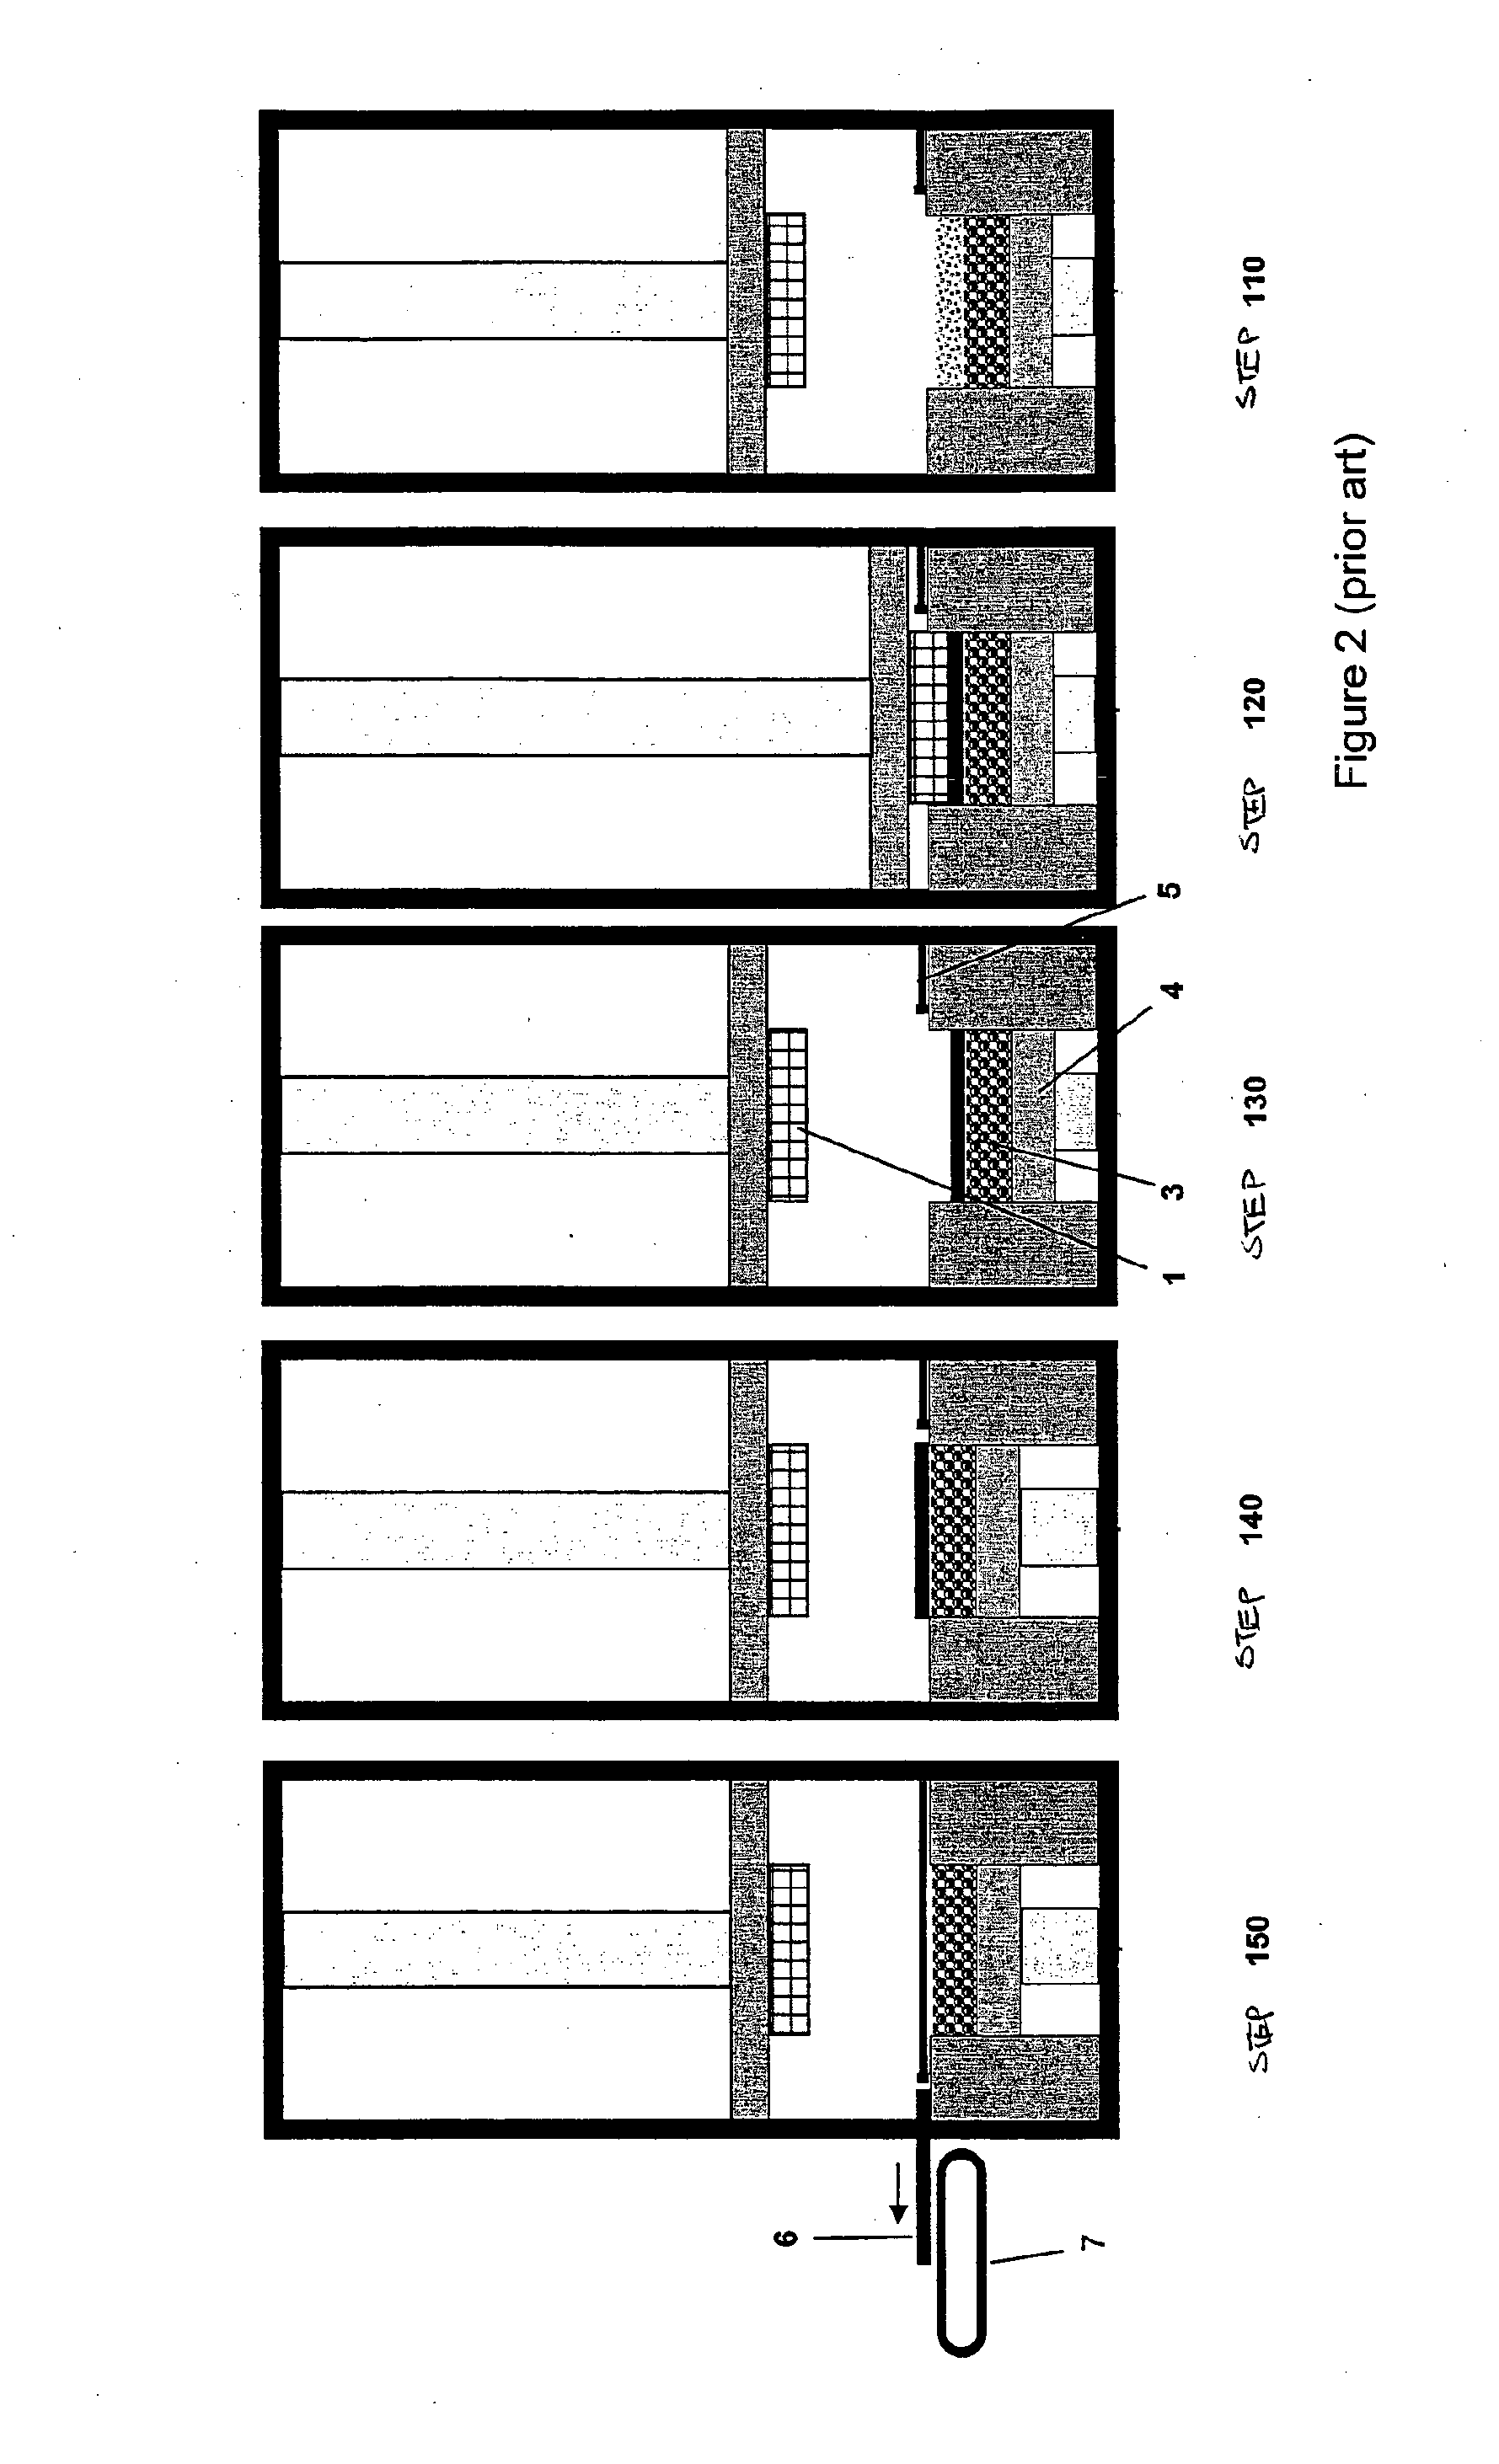 Apparatuses, system and methods for forming pressed articles and pressed articles formed thereby